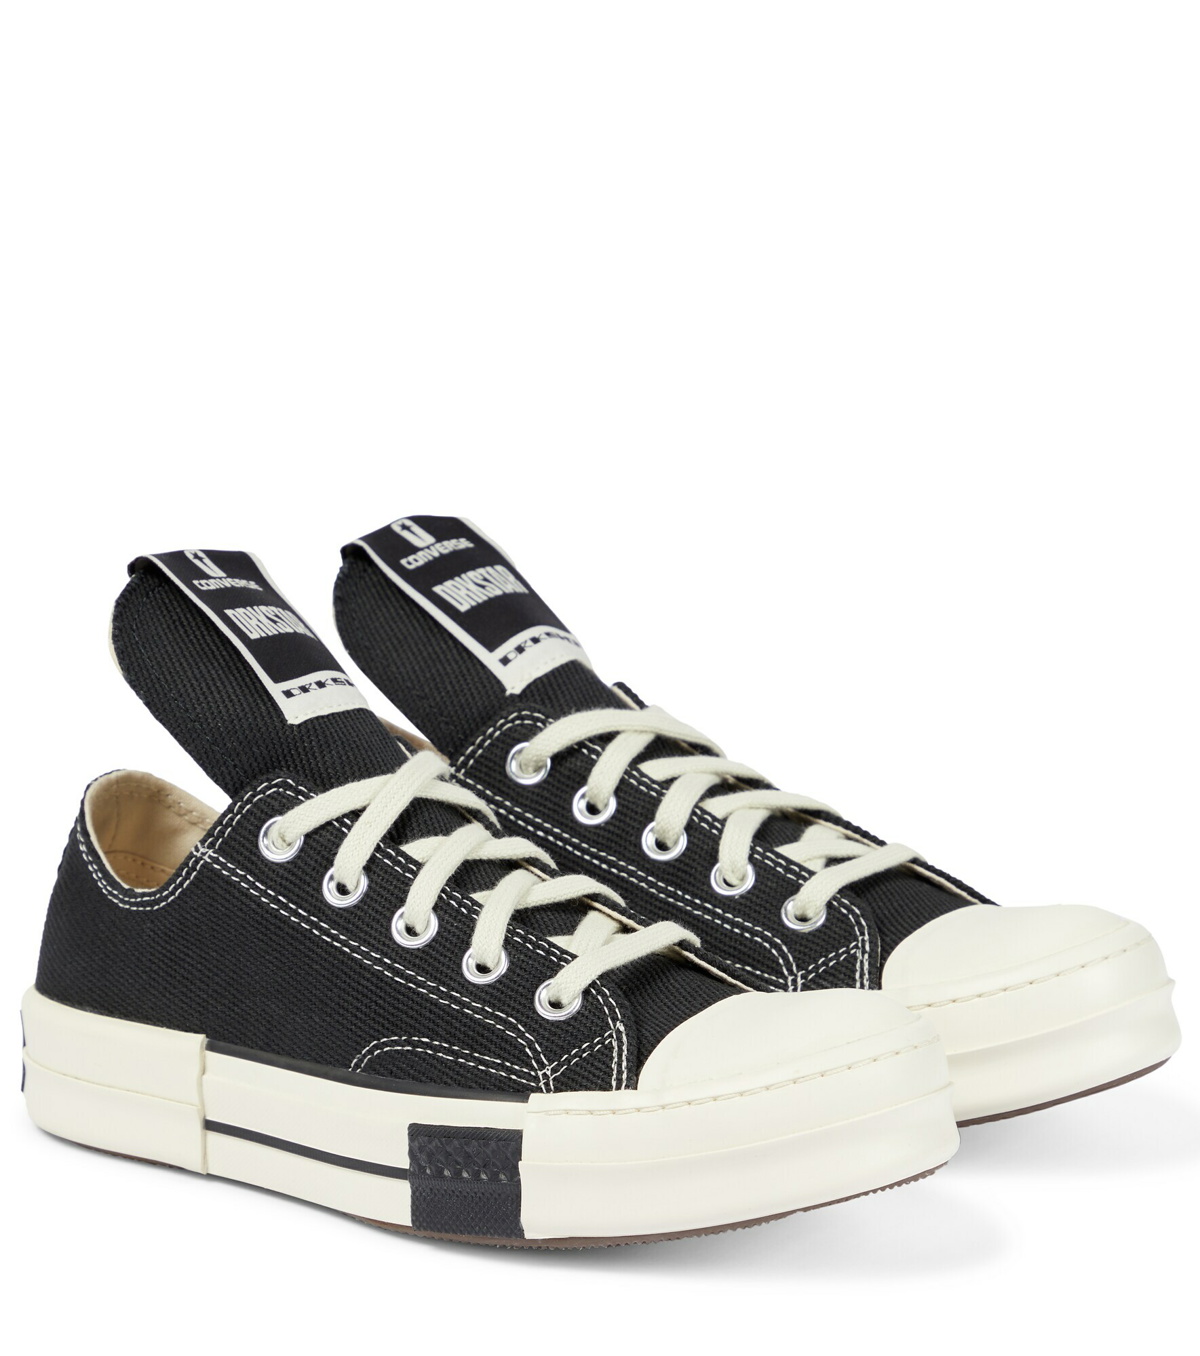 X Converse DRKSTAR Chuck 70 High Top Sneakers in White - Rick Owens